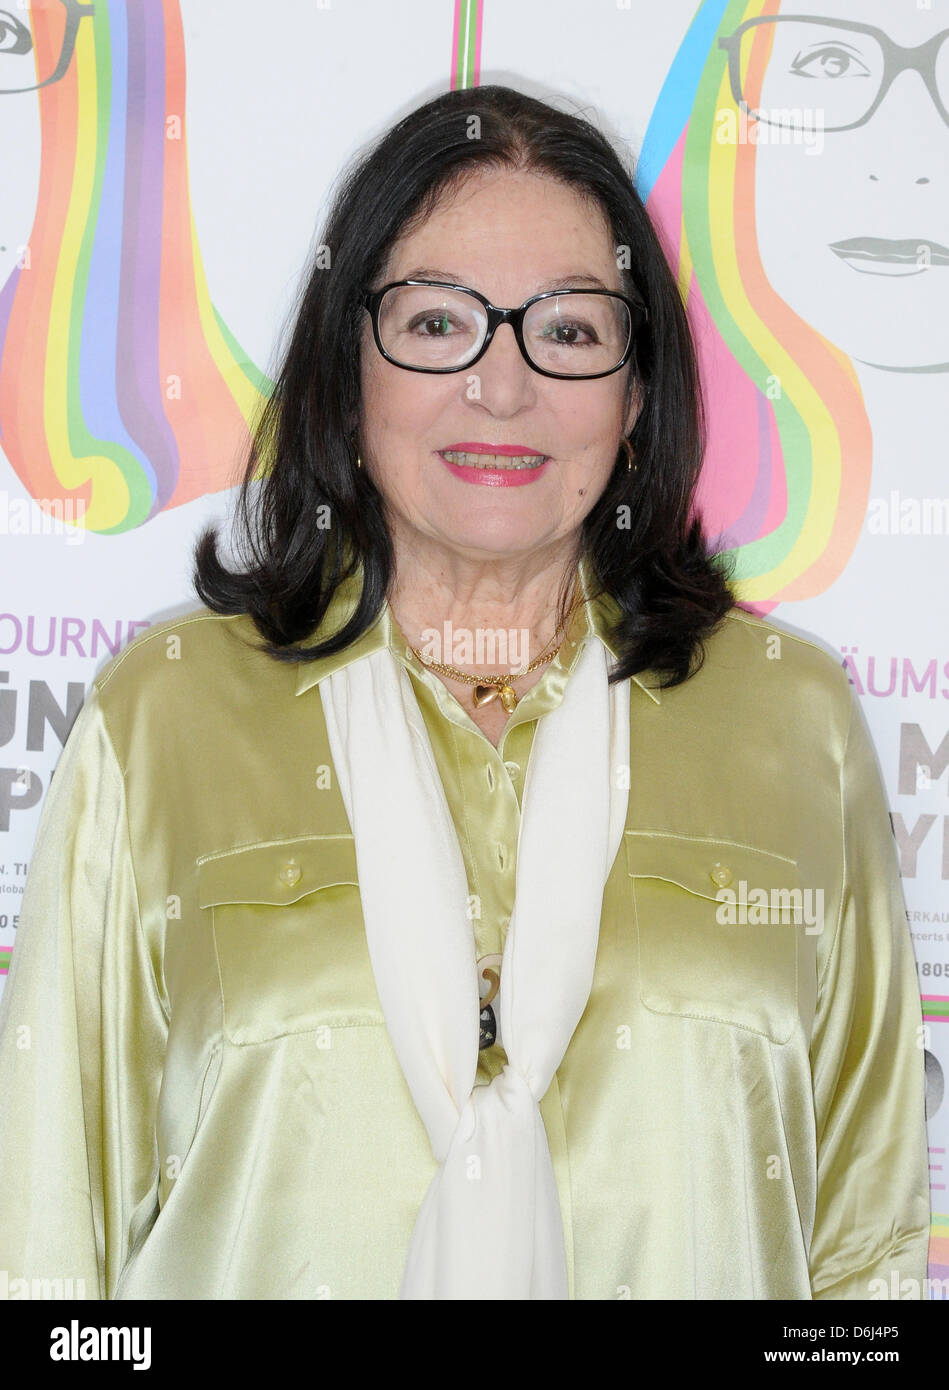 Greek singer Nana Mouskouri poses during a press session in Munich, Germany, 02 March 2012. Mouskouri is presenting her anniversary tour '50 Years White Roses' which starts on 11 April 2012 in Bremen. On April 30th the singer will be in Munich. Photo: Felix Hoerhager Stock Photo